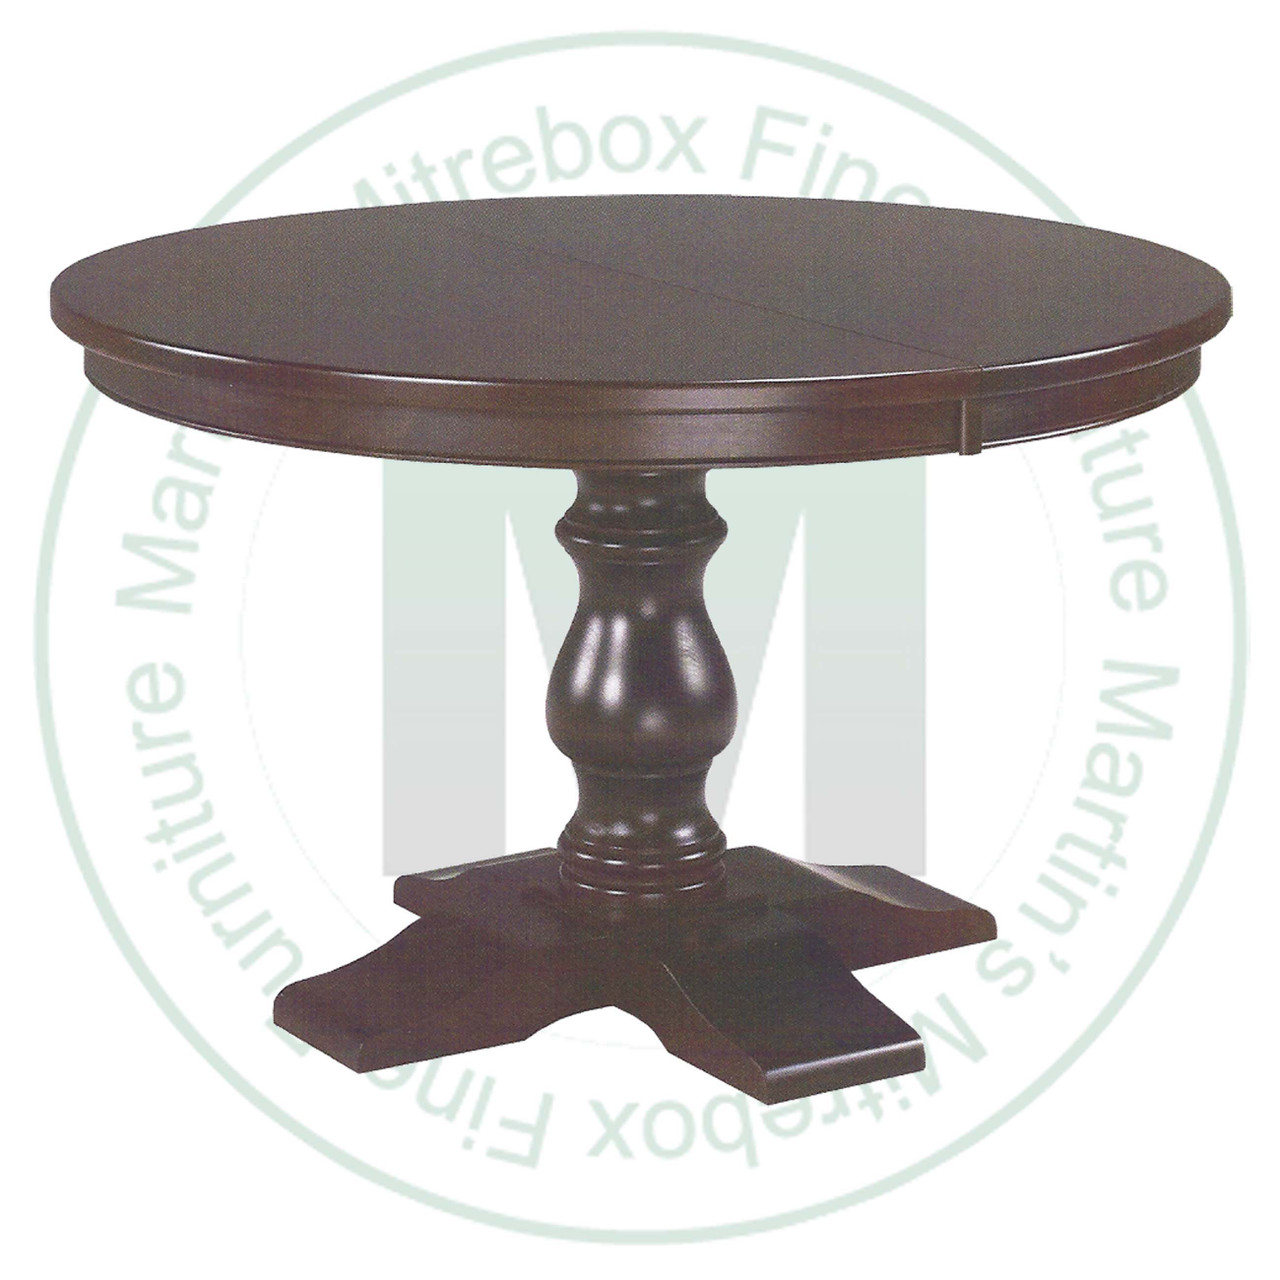 Oak Savannah Single Pedestal Table 36''D x 54''W x 30''H Round Solid Table. Table Has 1'' Thick Top.